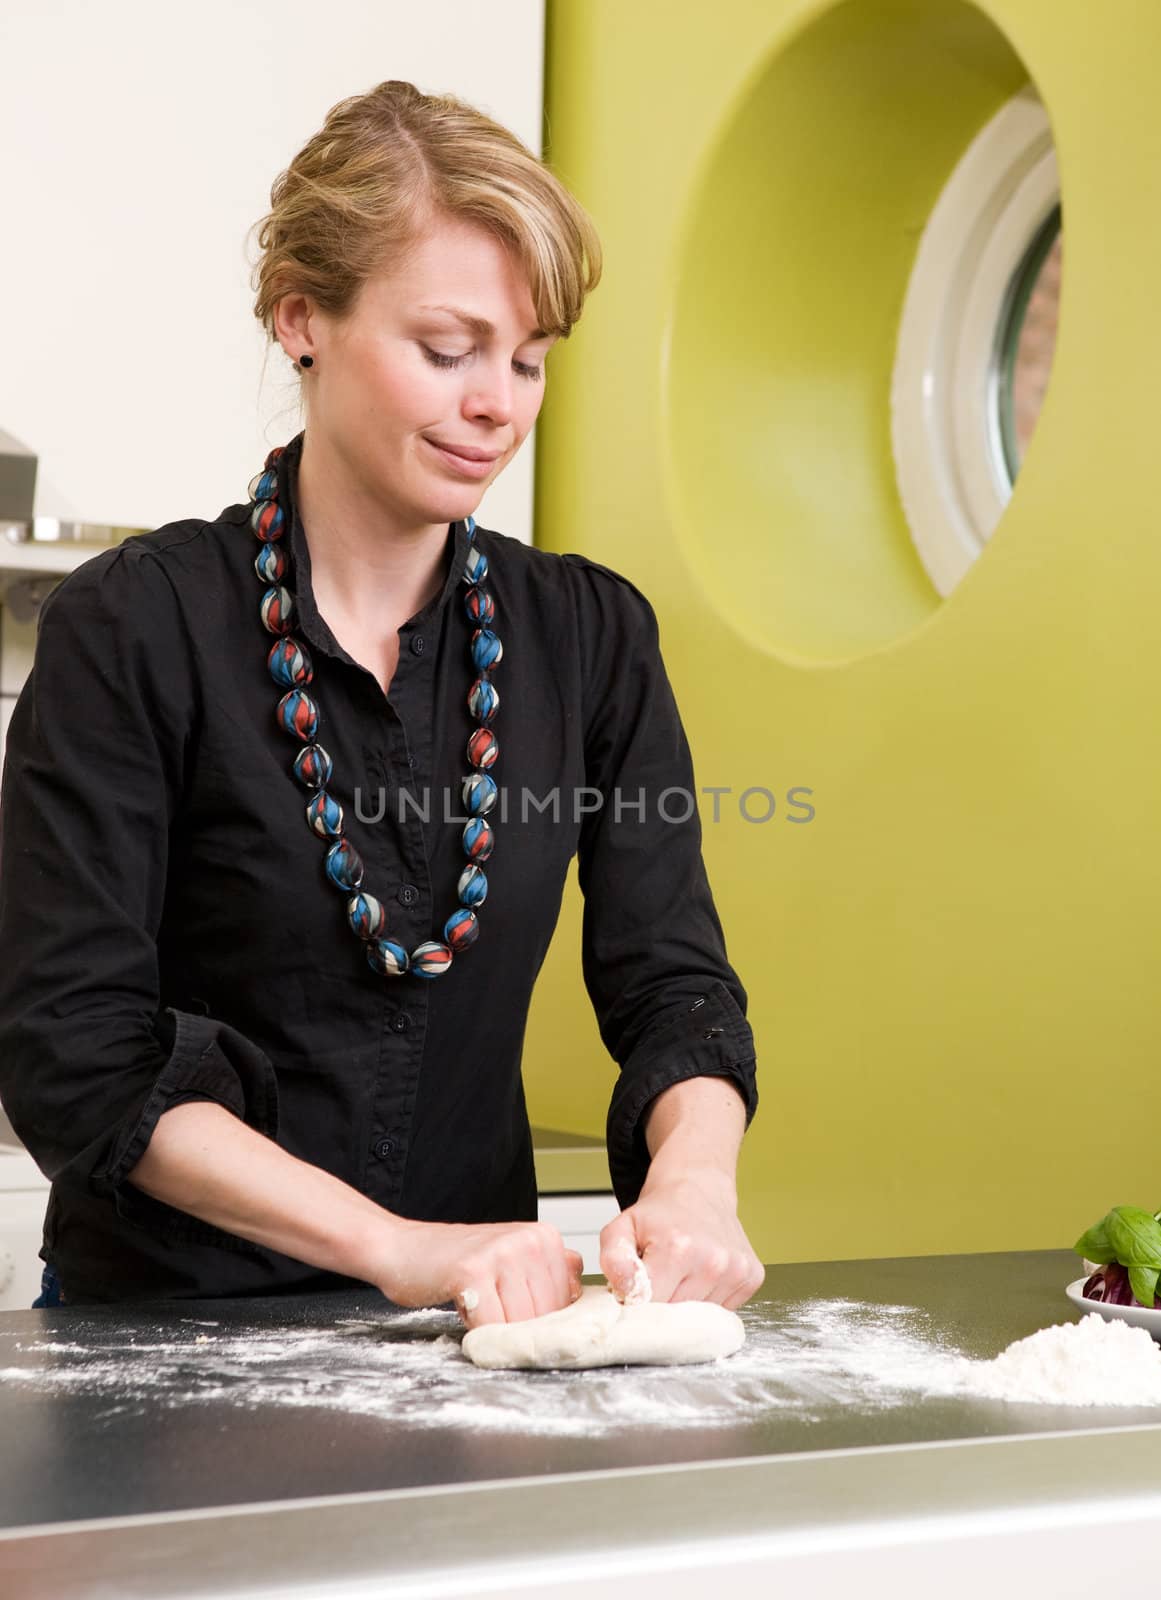 A young woman is making pizza dough on the kitchen counter at home in her apartment.